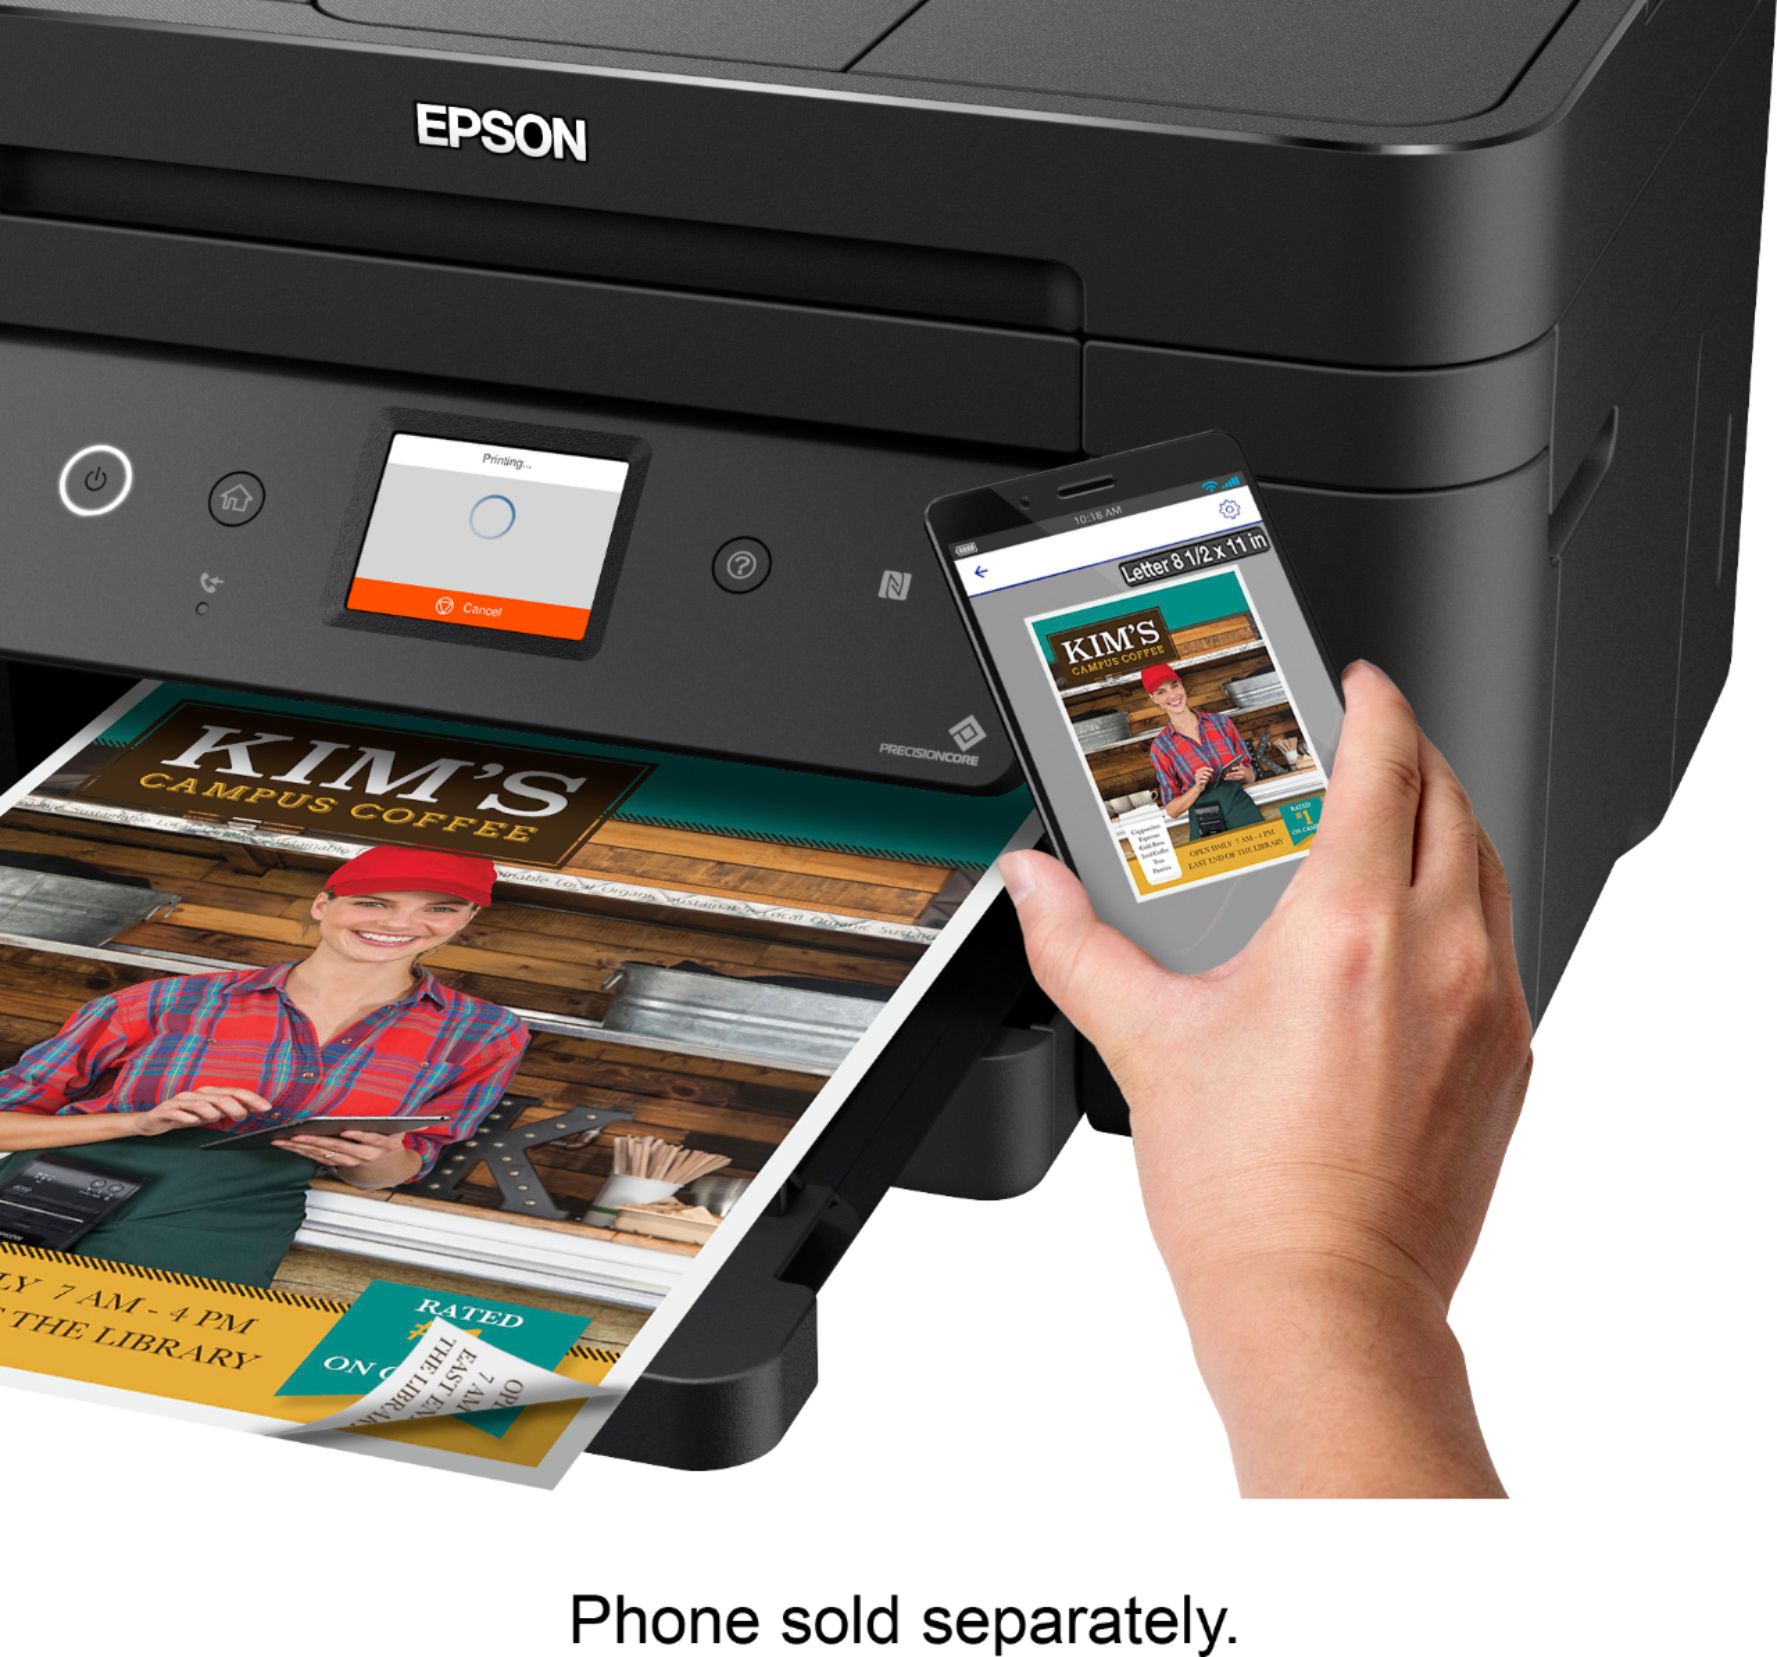 Epson WF-7515 Printer in SE28 London for £20.00 for sale